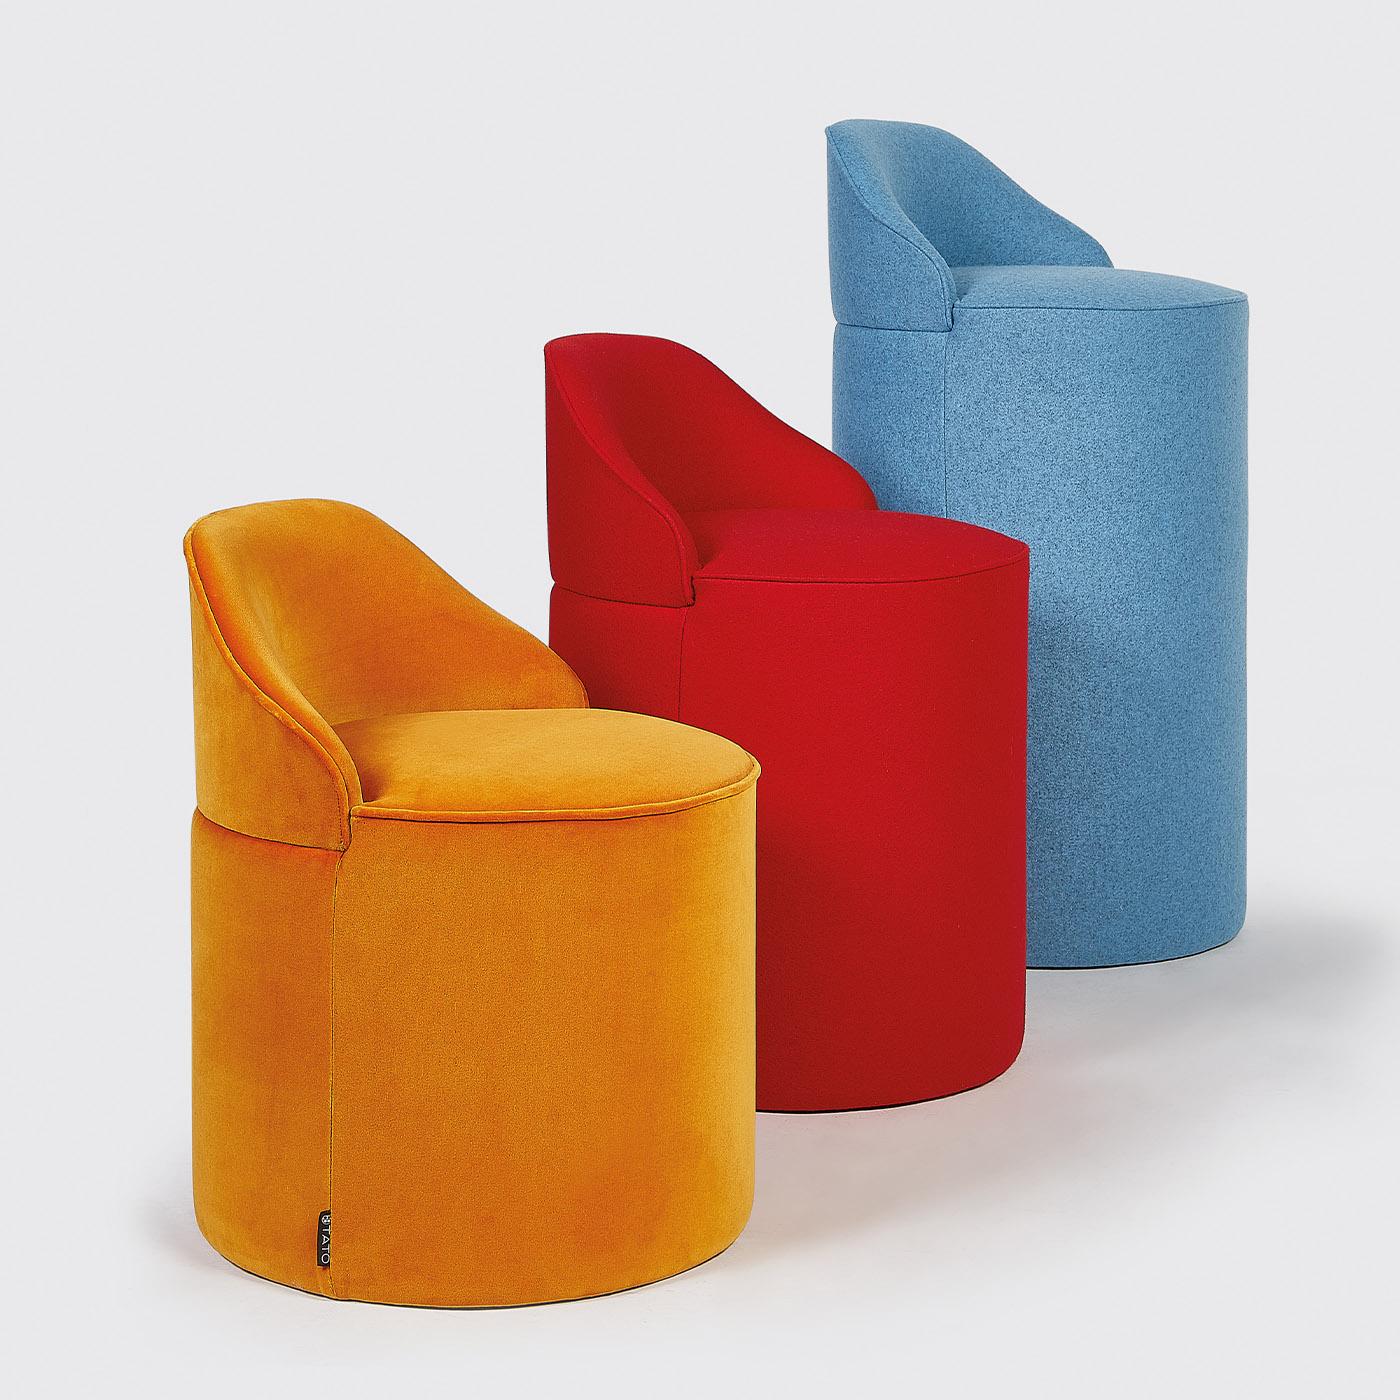 Clean and ergonomic, this pouf belongs to the Sella Collection of seating solutions inspired by a horse saddle and rendered in various vivacious tones. Distinguished by an intense red hue, it is entirely upholstered with felt wool, also available in